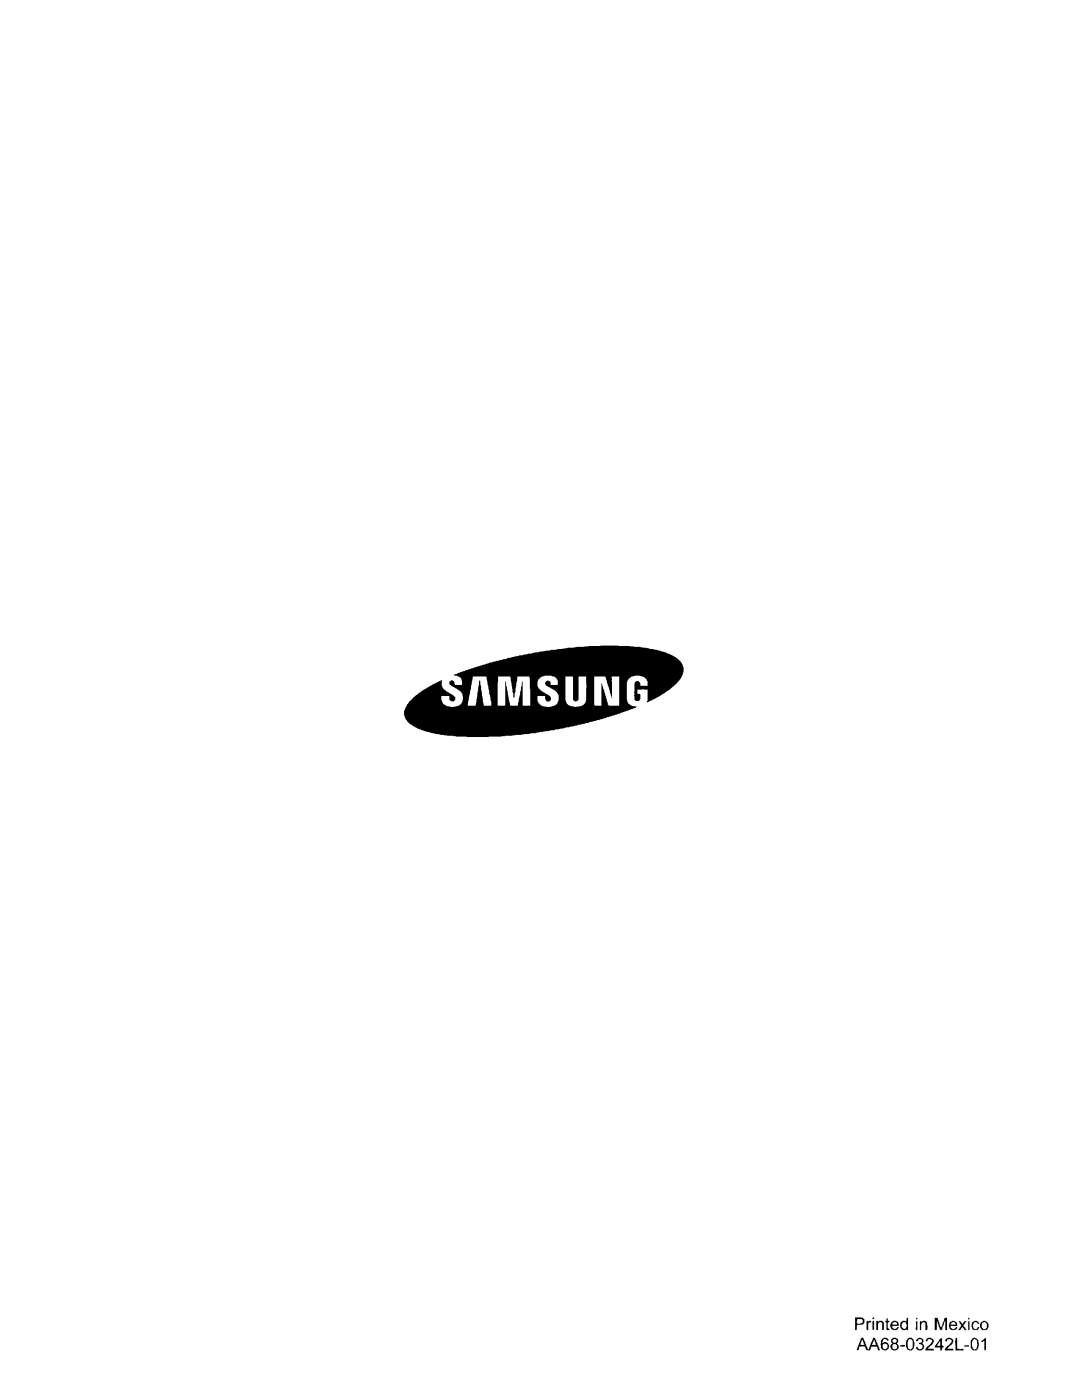 Samsung 451 user manual Printed in Mexico AA68-03242L-01 